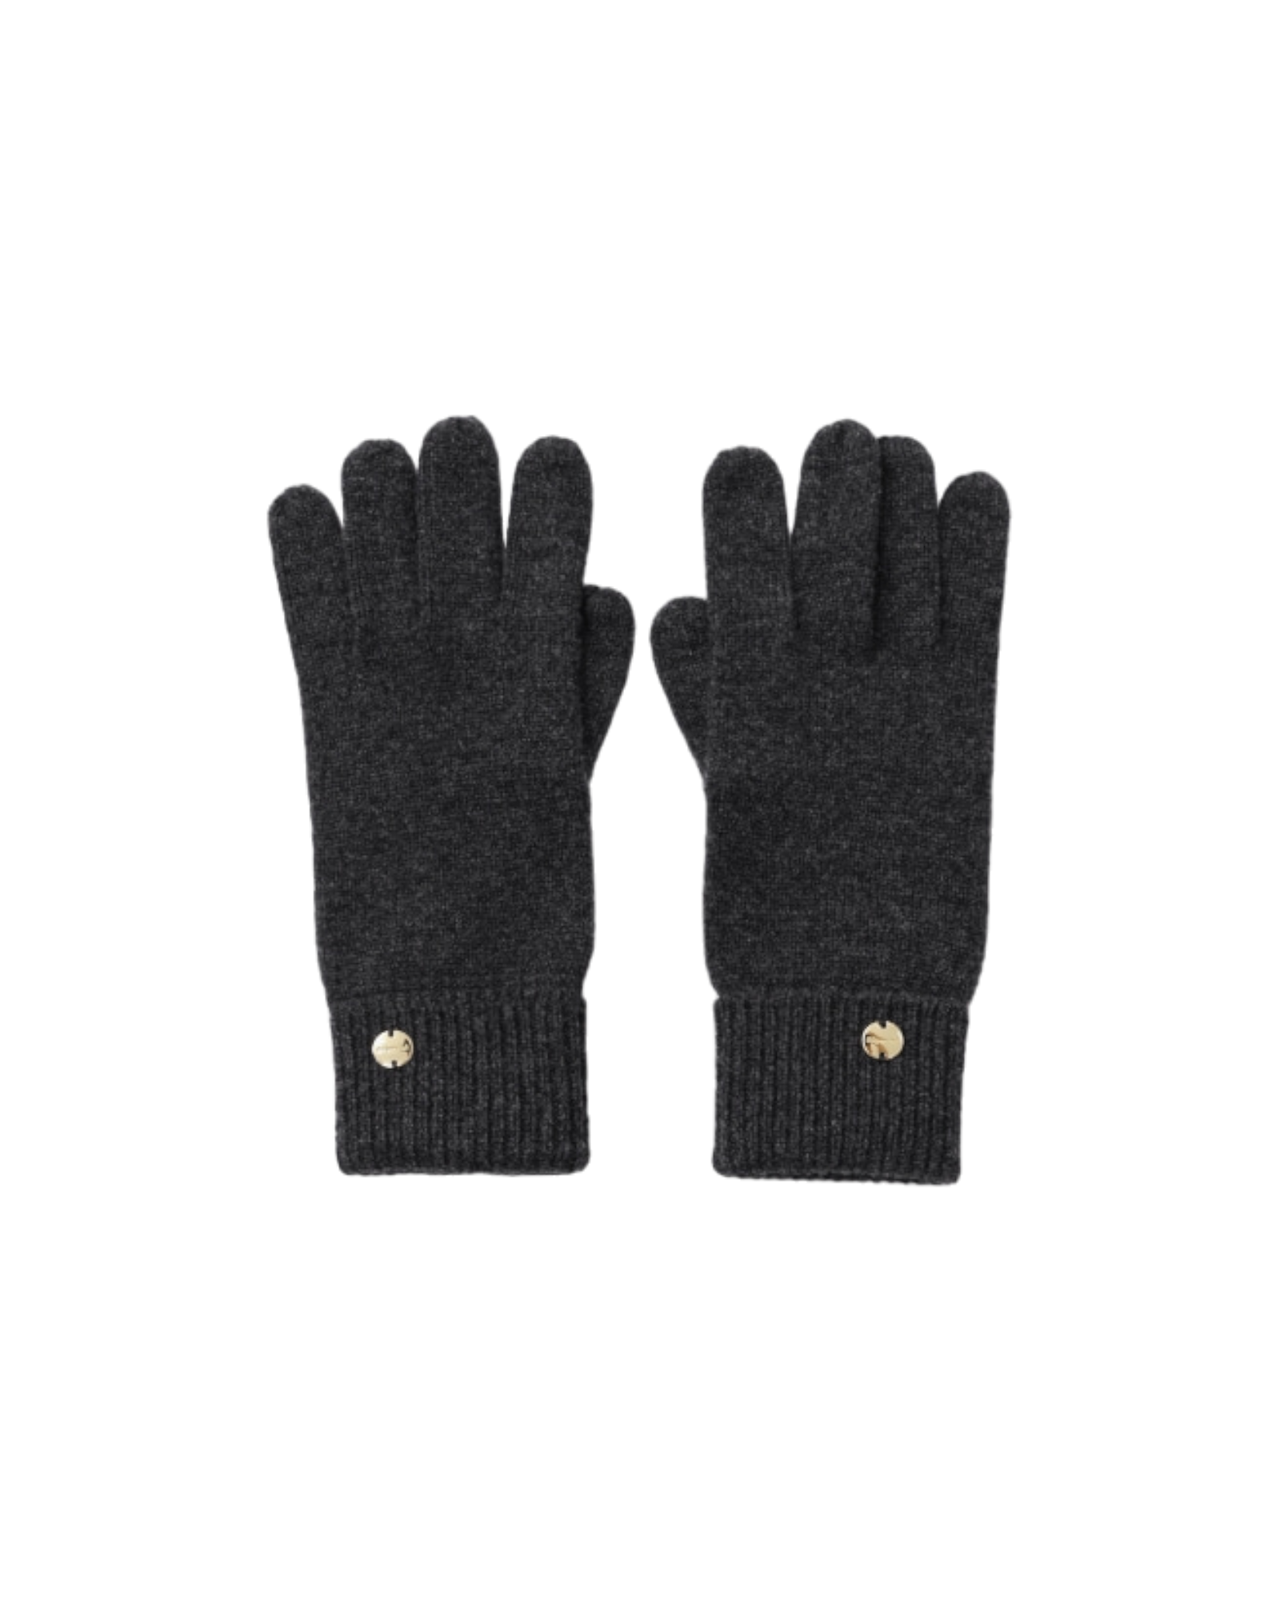 Wool Knit Gloves In Charcoal